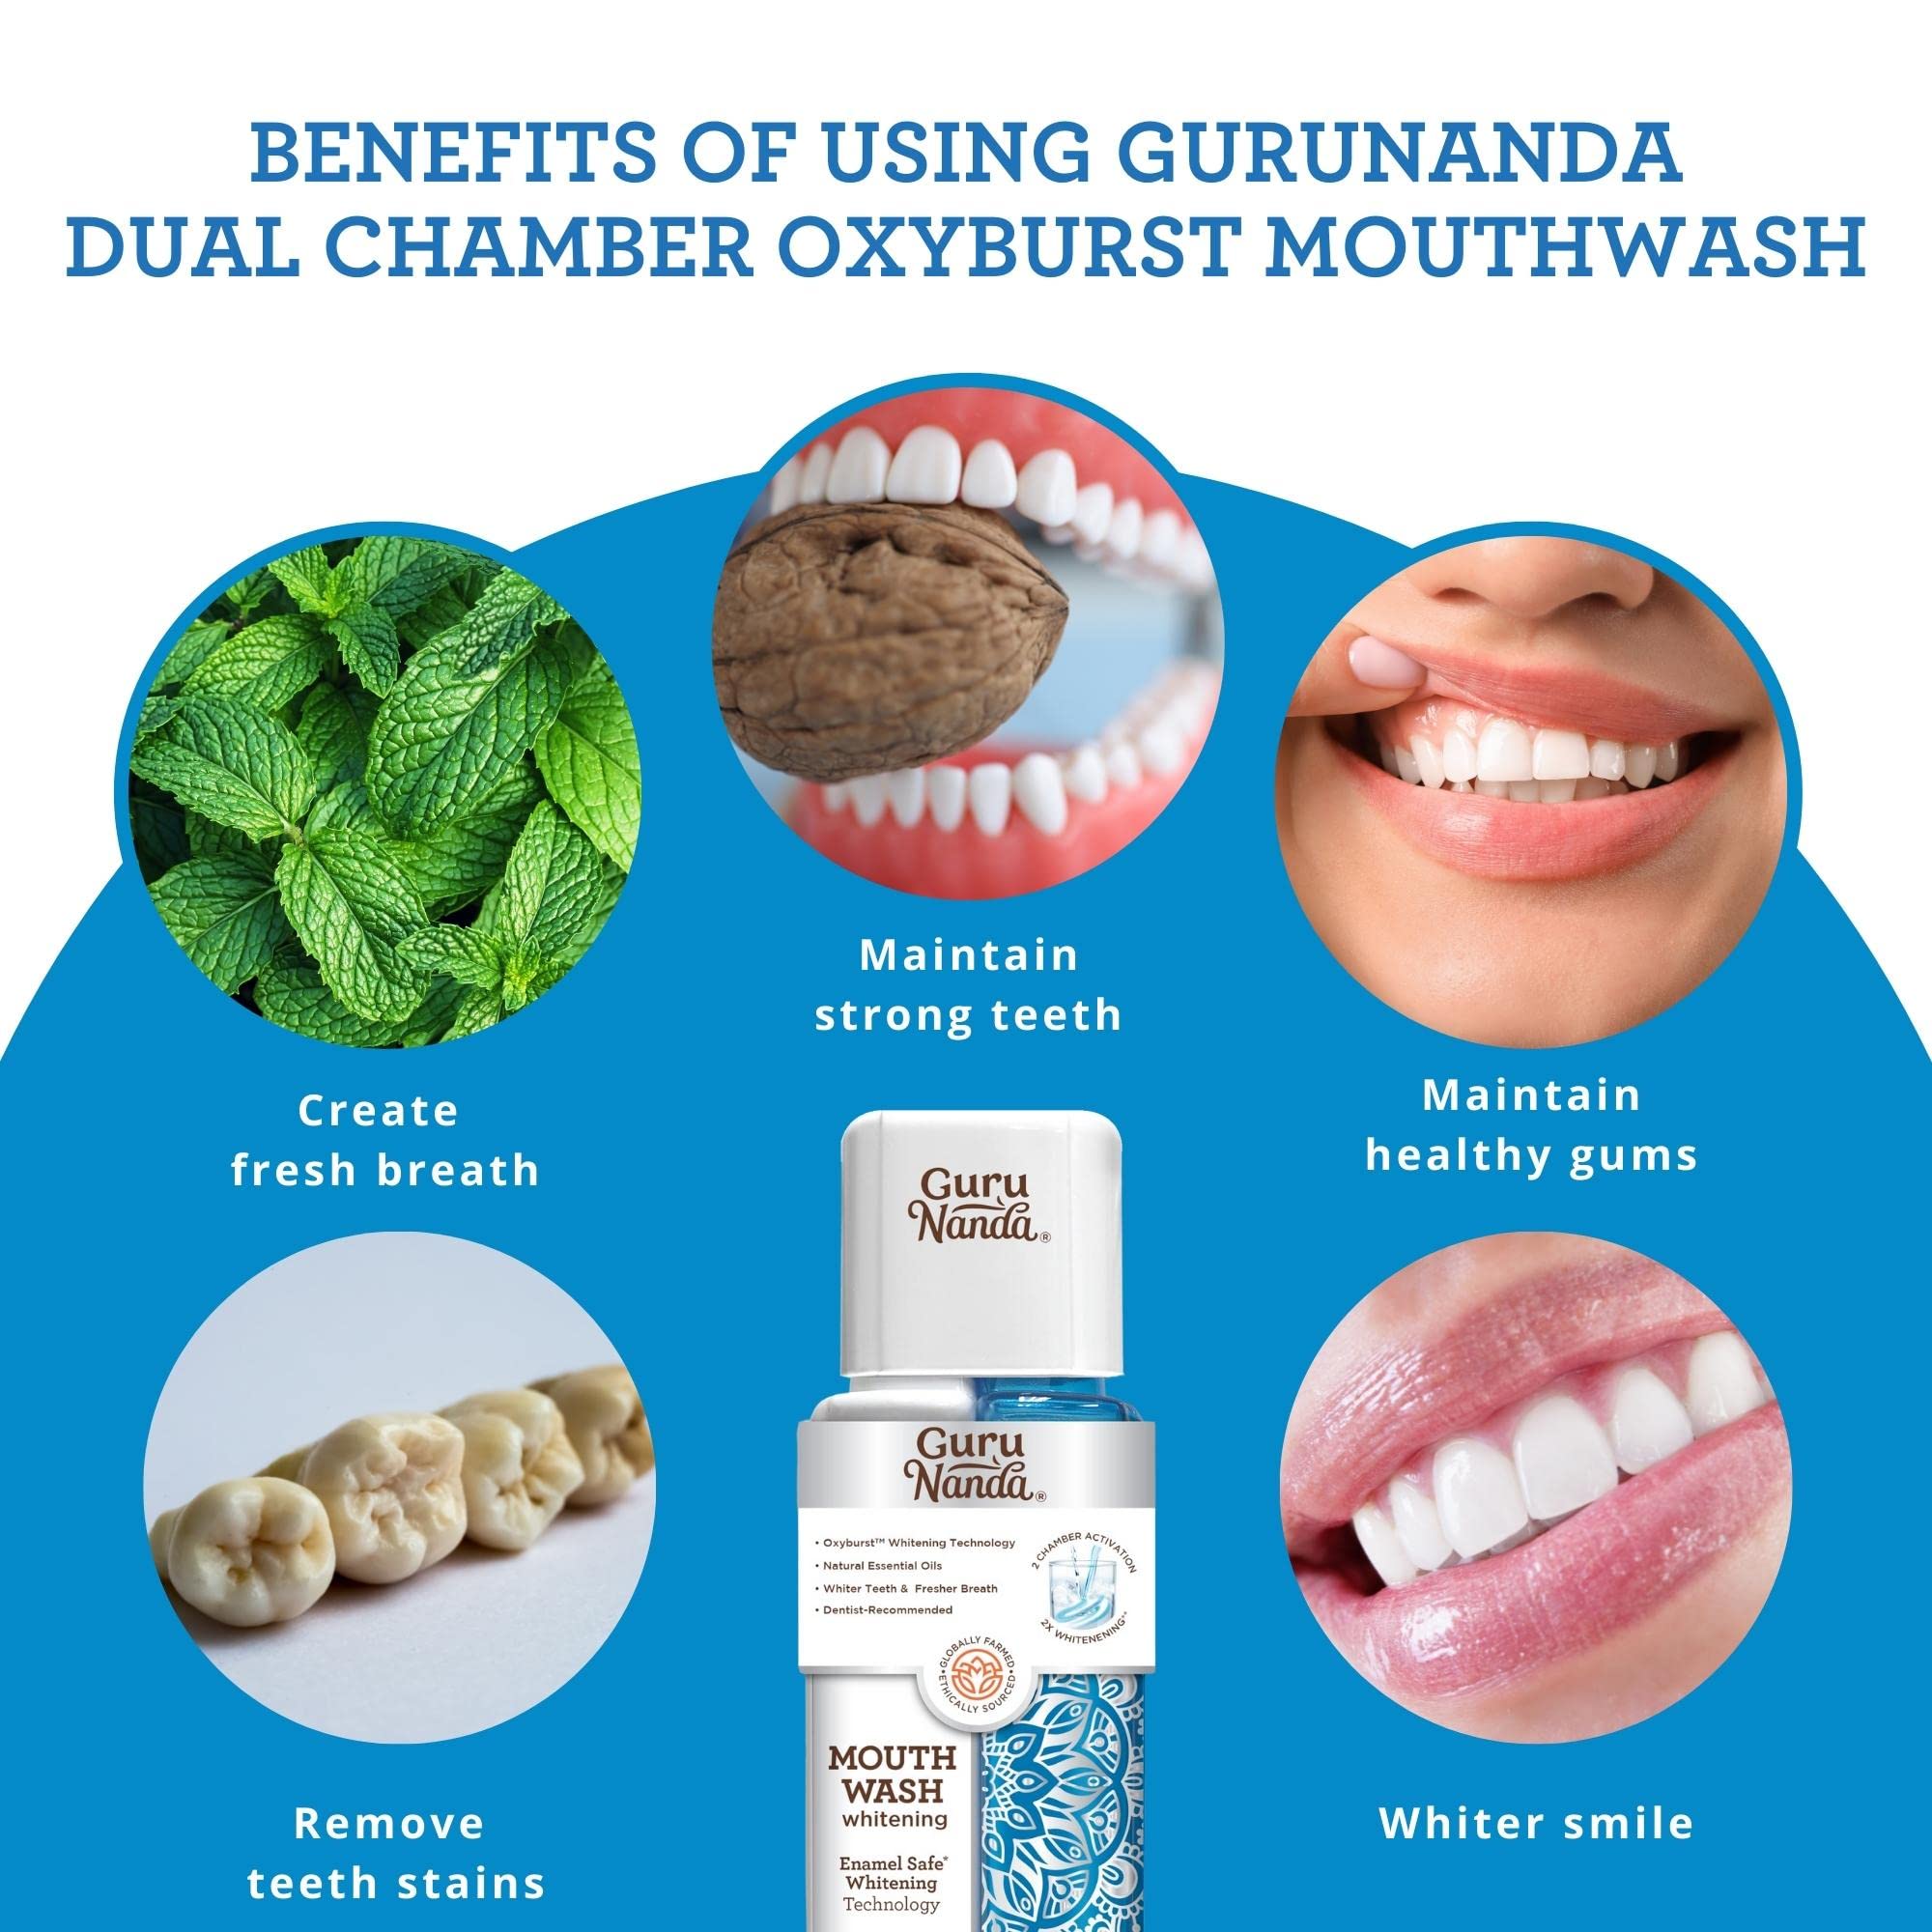 GuruNanda Dual Barrel Oxyburst Whitening Mouthwash, Concentrated Mouthwash- Helps with Bad Breath & Whitening Strips for Whiter Teeth, Made of Natural Coconut Oil for Sensitive Teeth